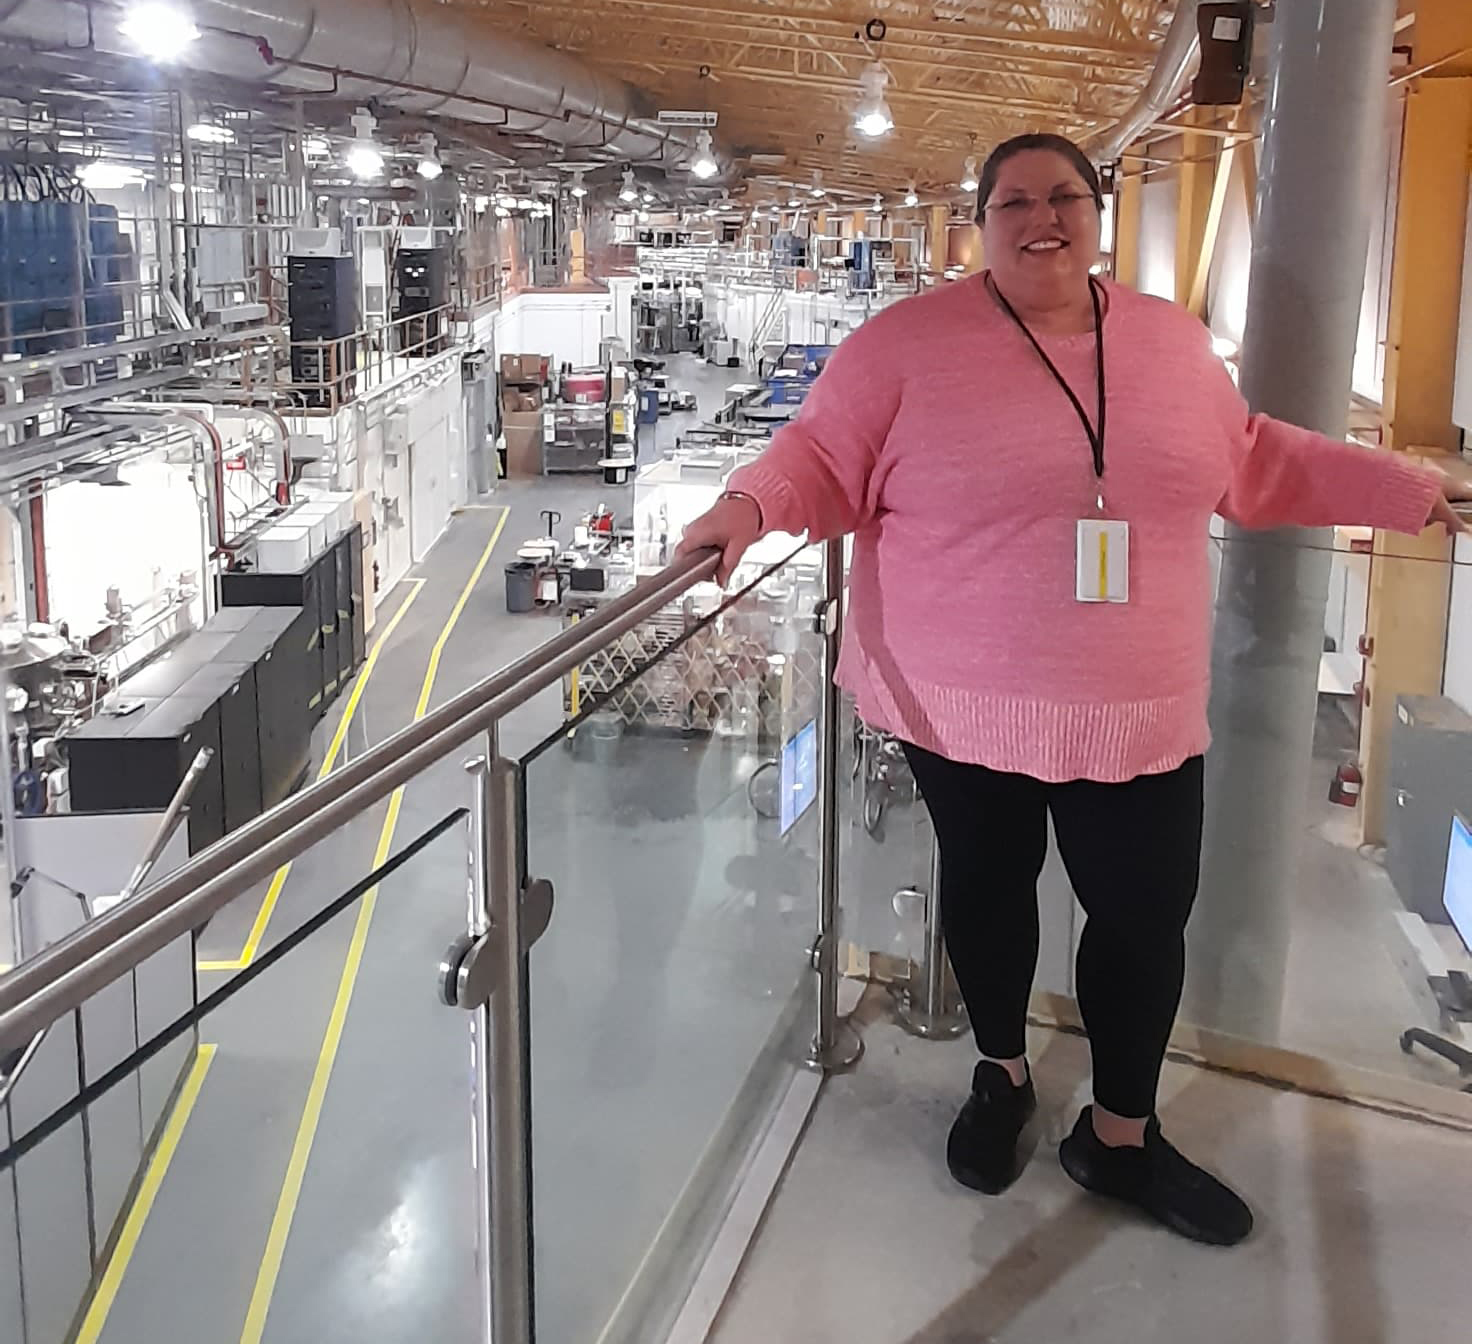 A woman in a pink sweater stands on a walkway above a large laboratory that stretches far behind her with lots of equipment